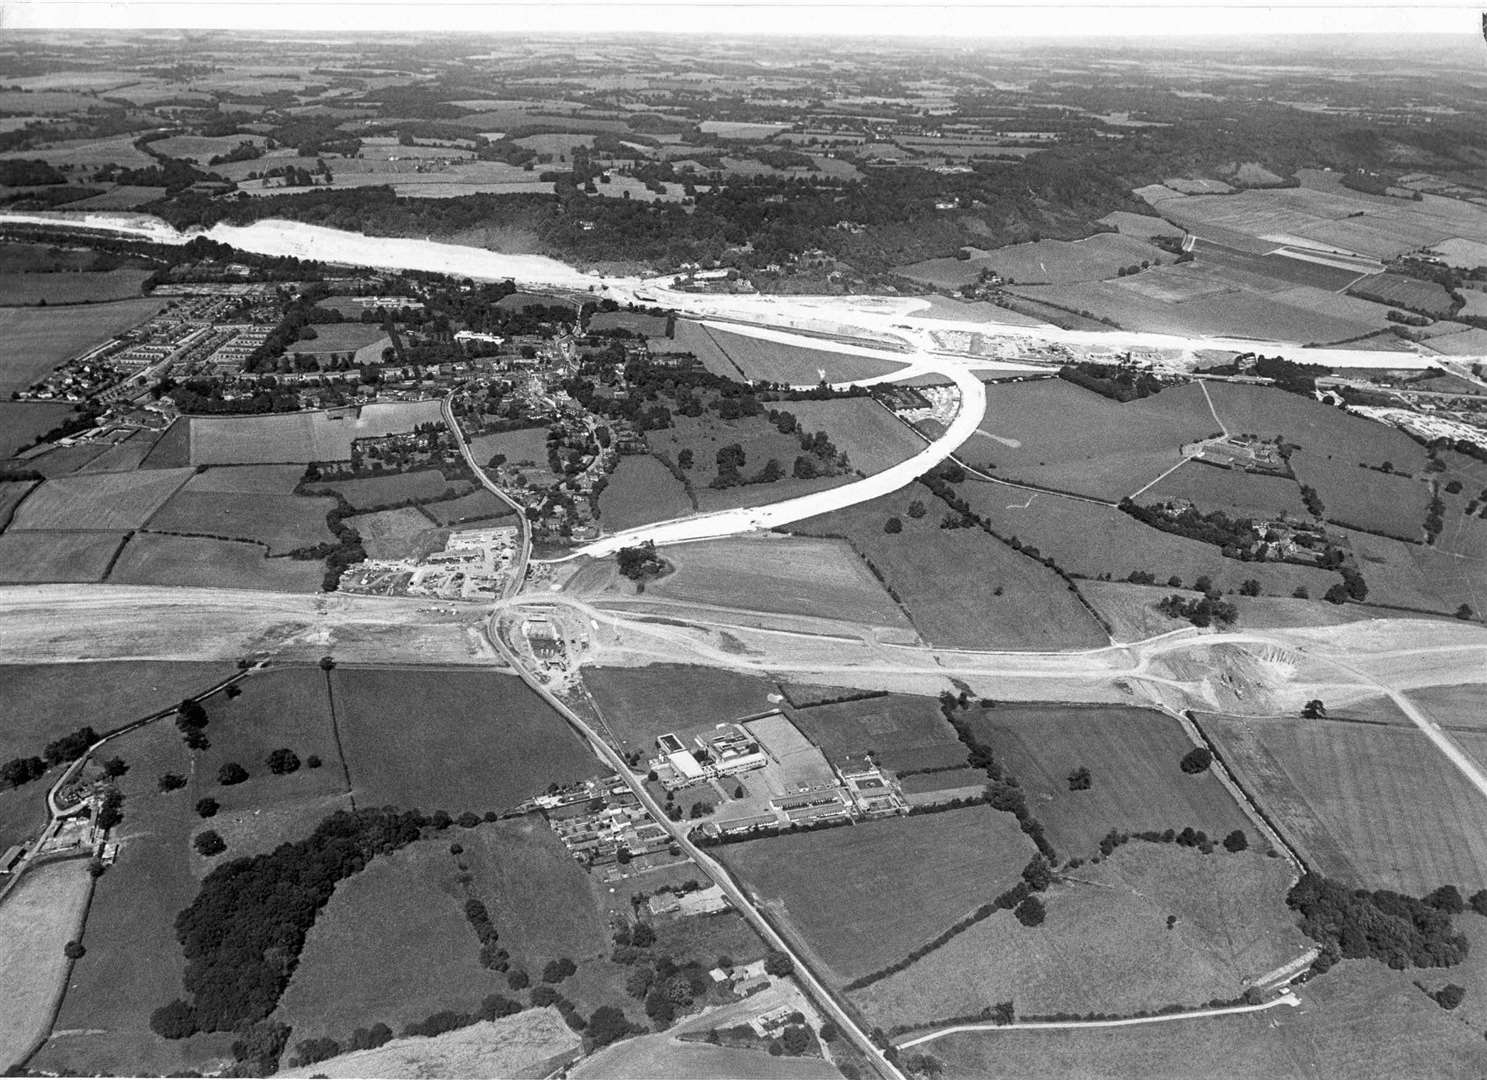 Aerial view of the new motorway being built at Wrotham, in August 1978, the M20 is in the background joined by the Wrotham Bypass